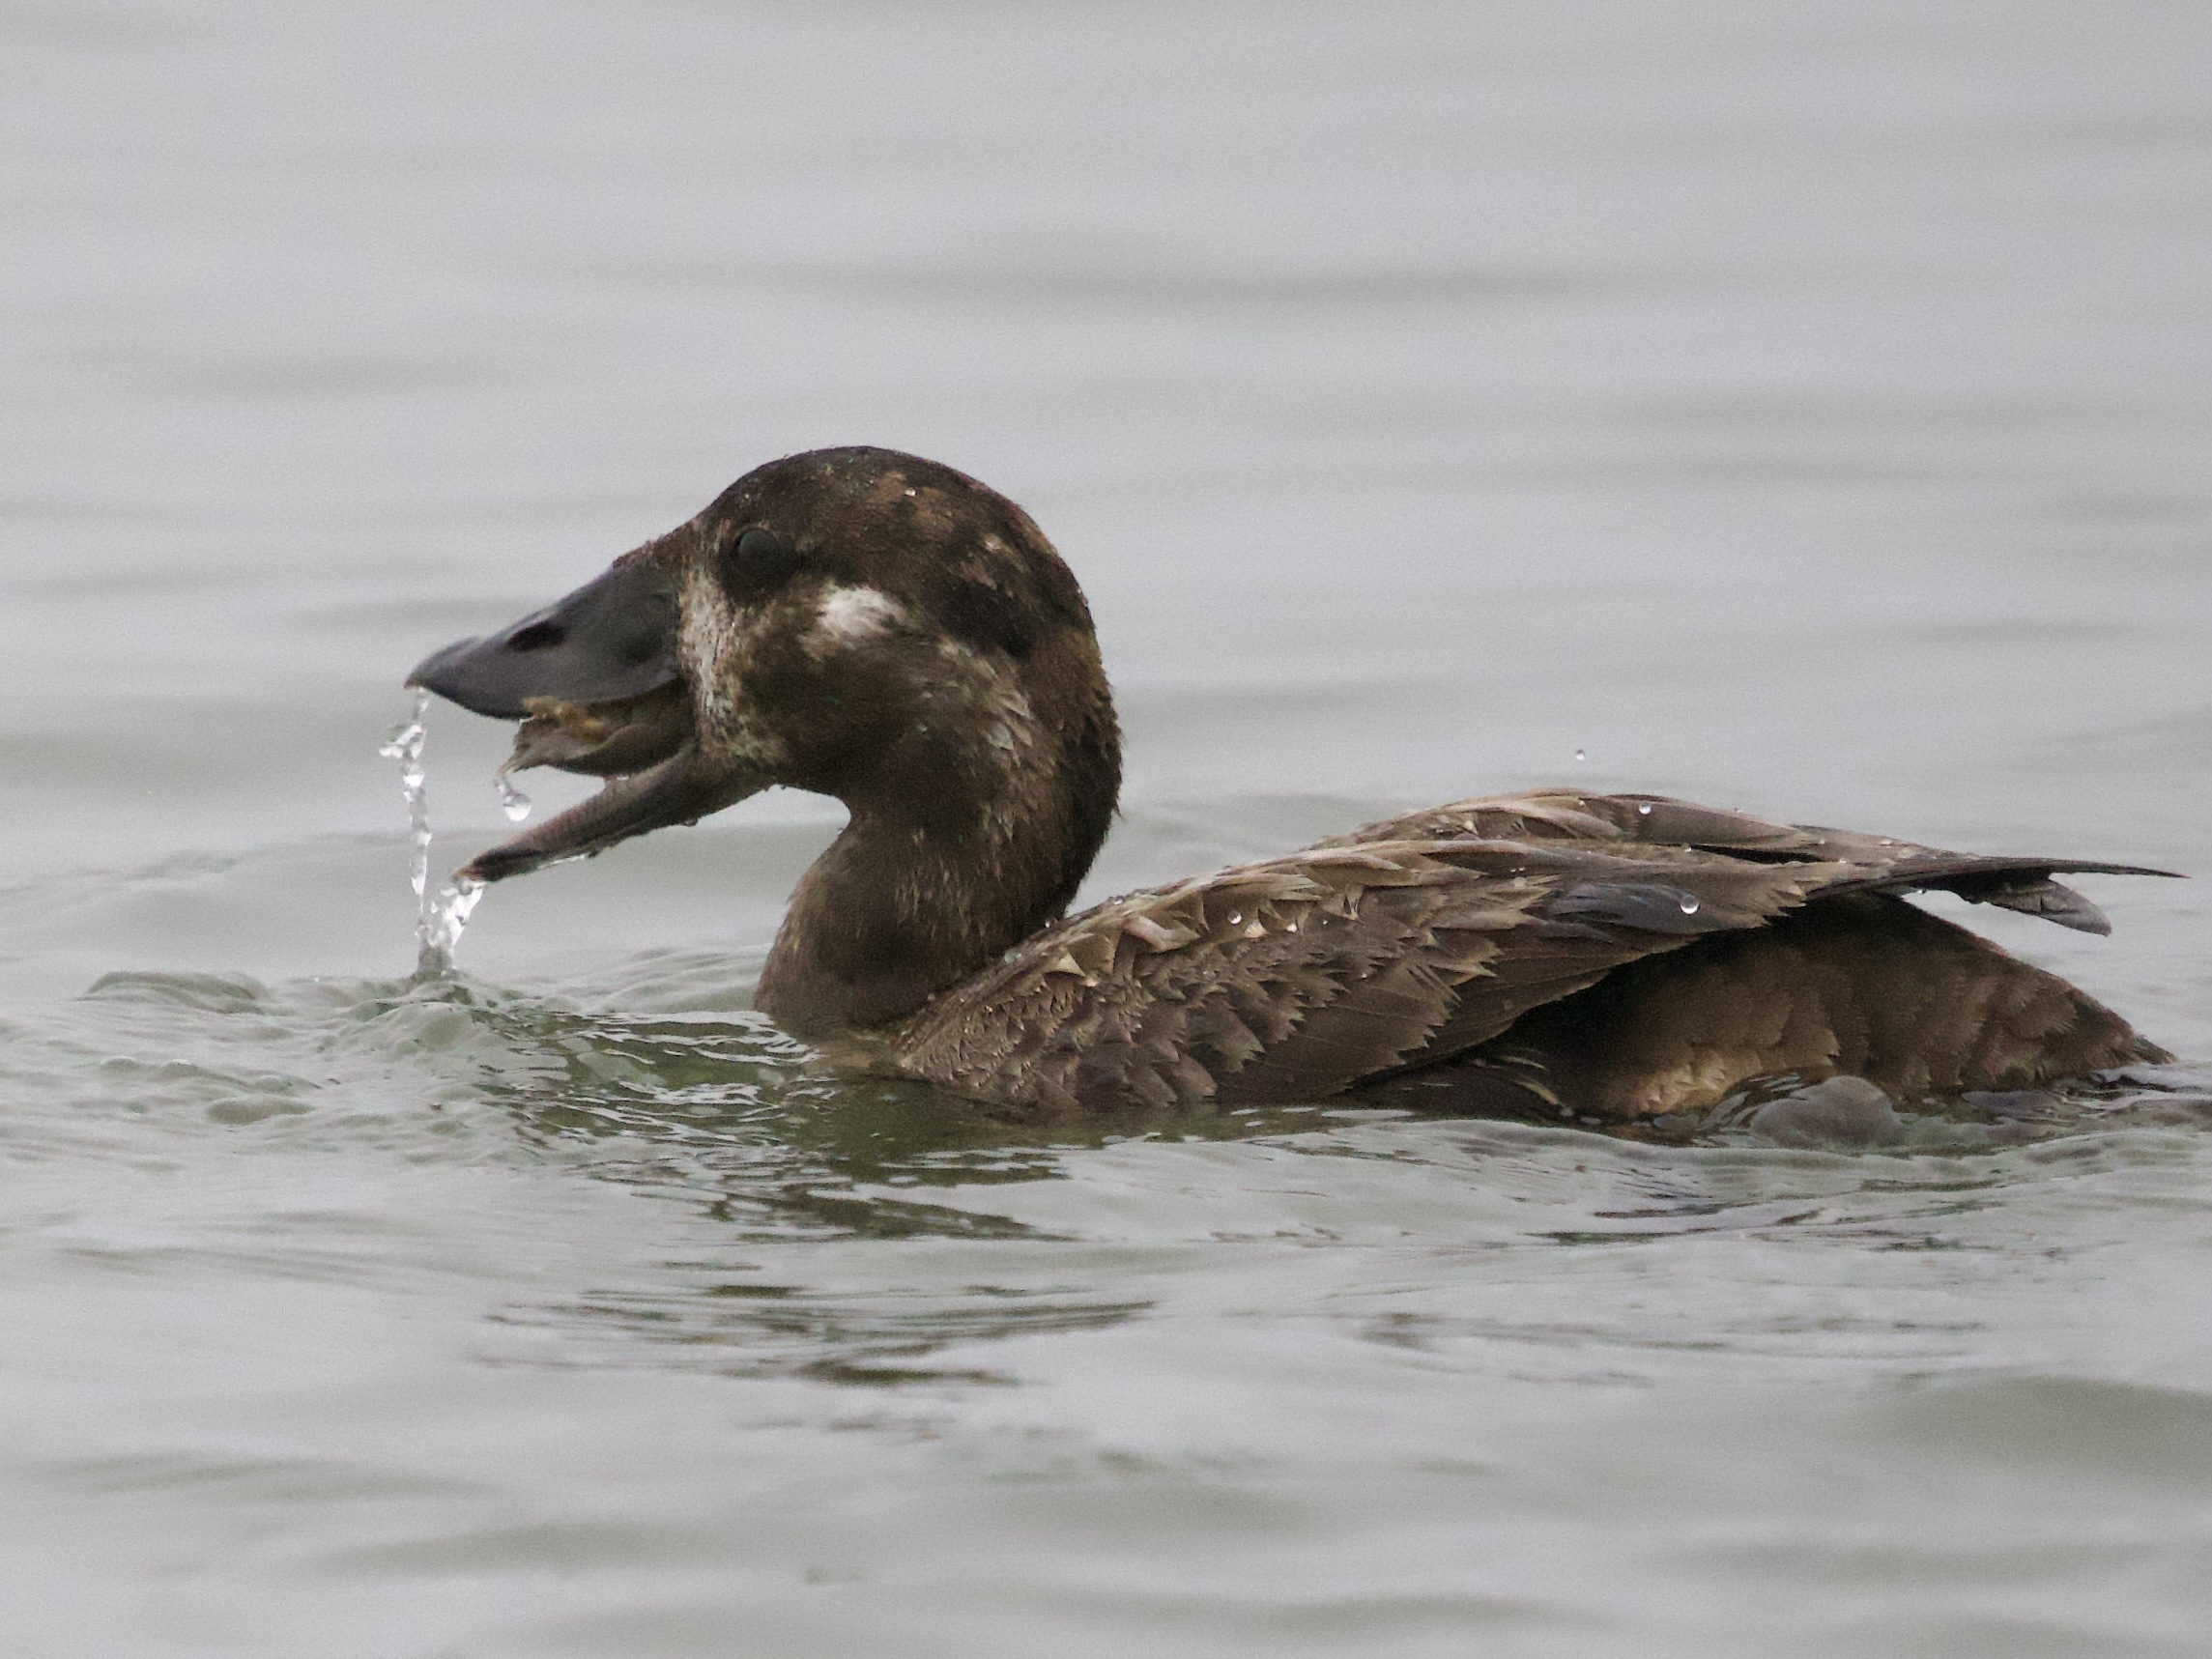 Female Surf Scoter with Mole Crab in San Francisco Bay